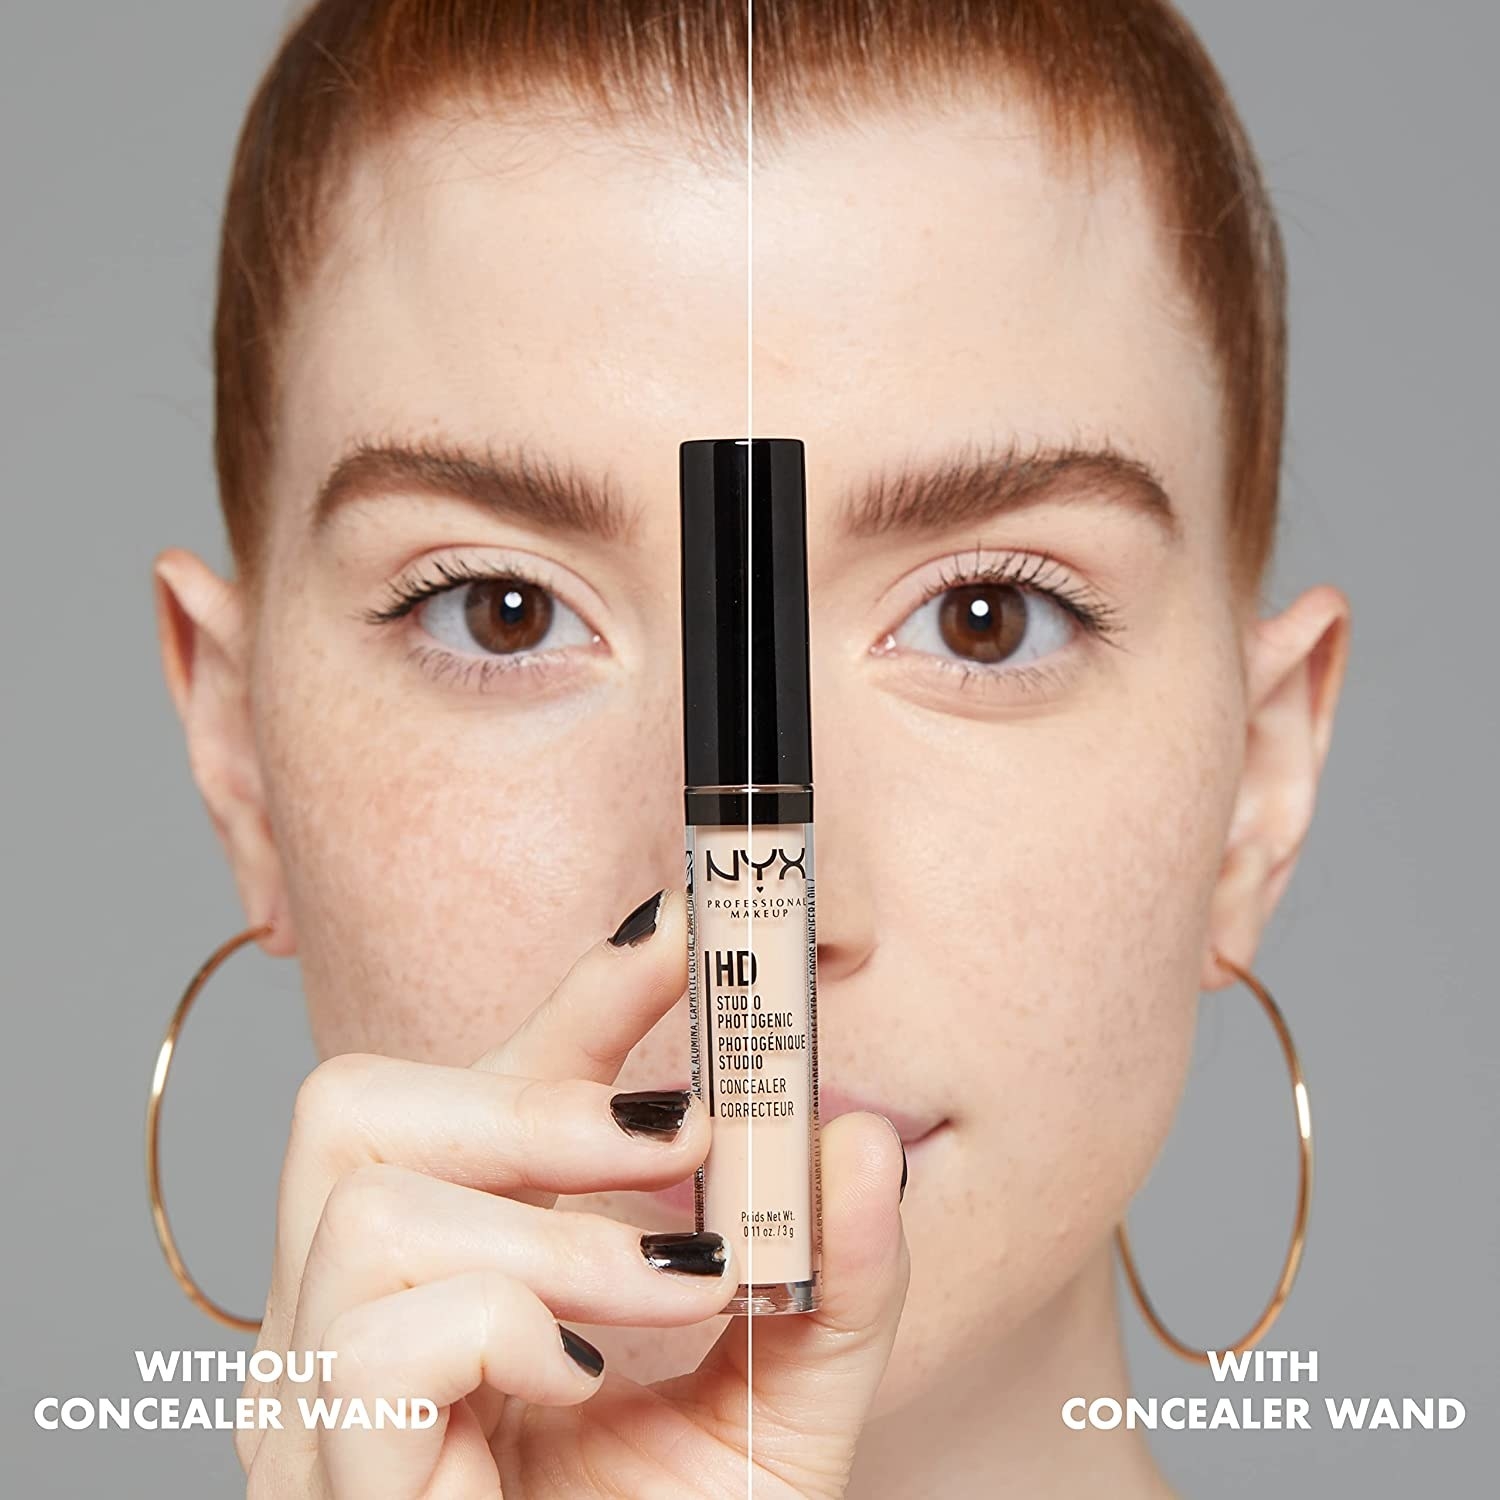 A person holding up a tube of concealer